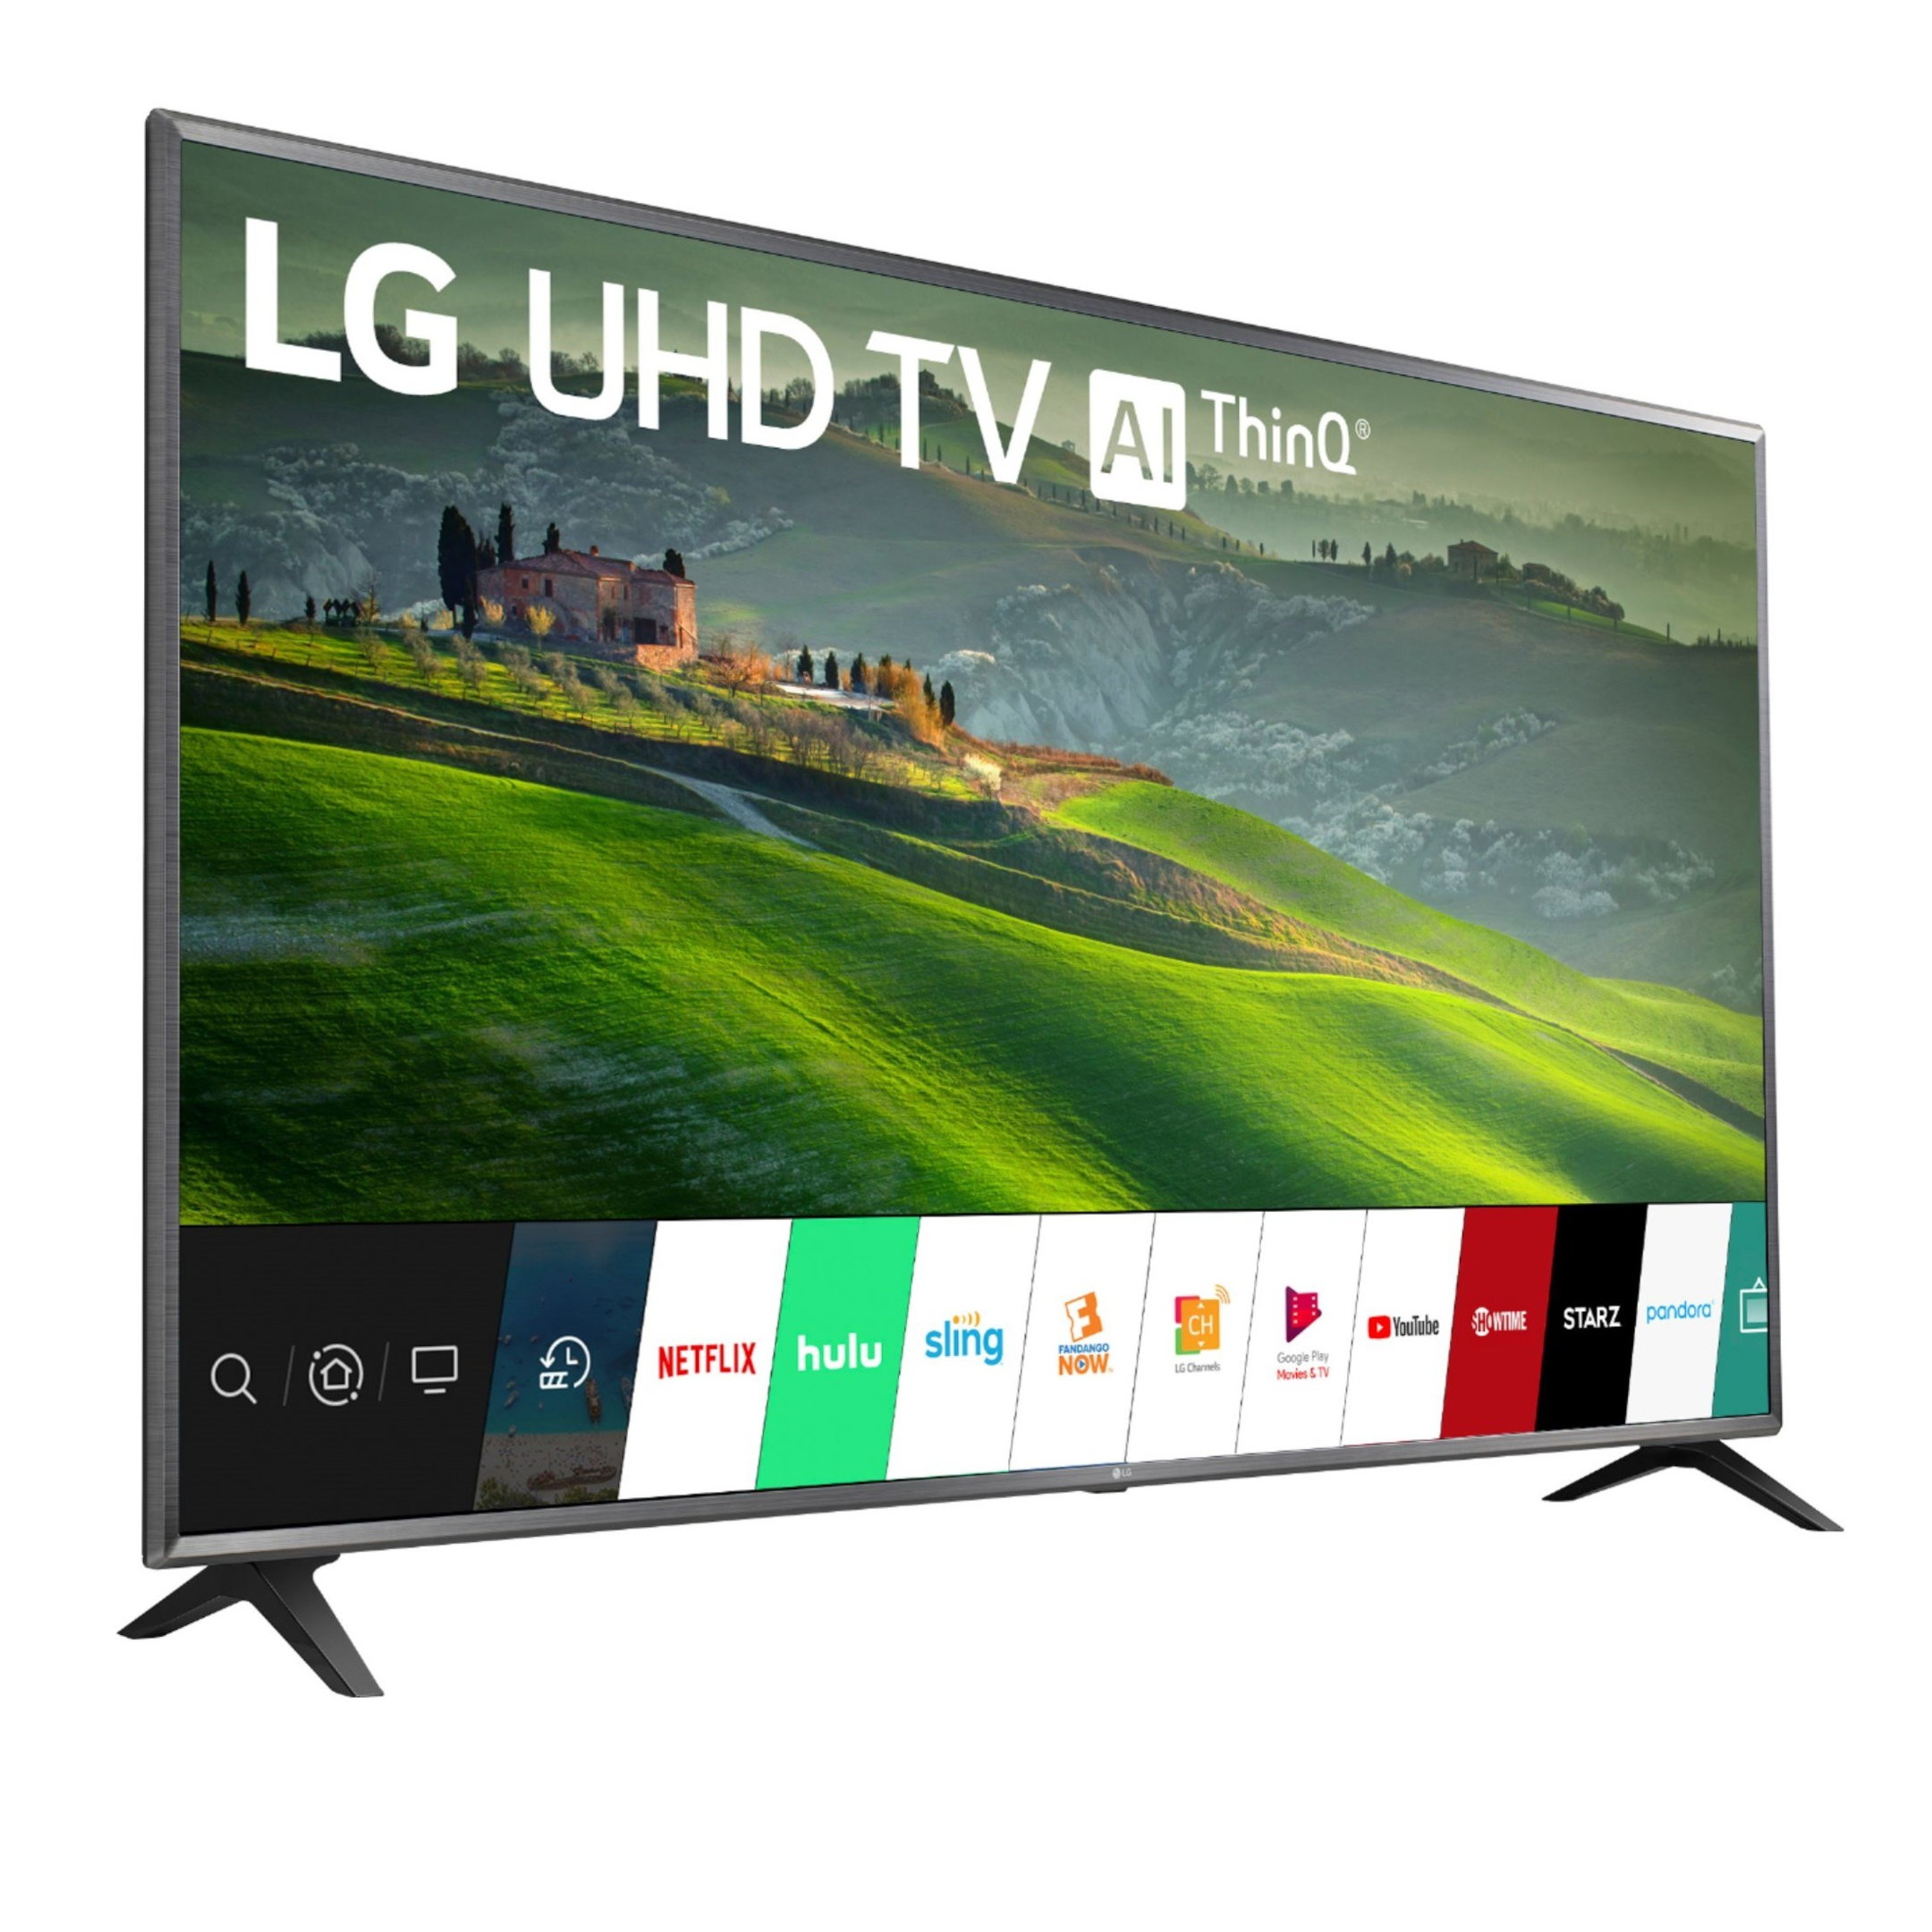 High quality picture of 75-inch TV 